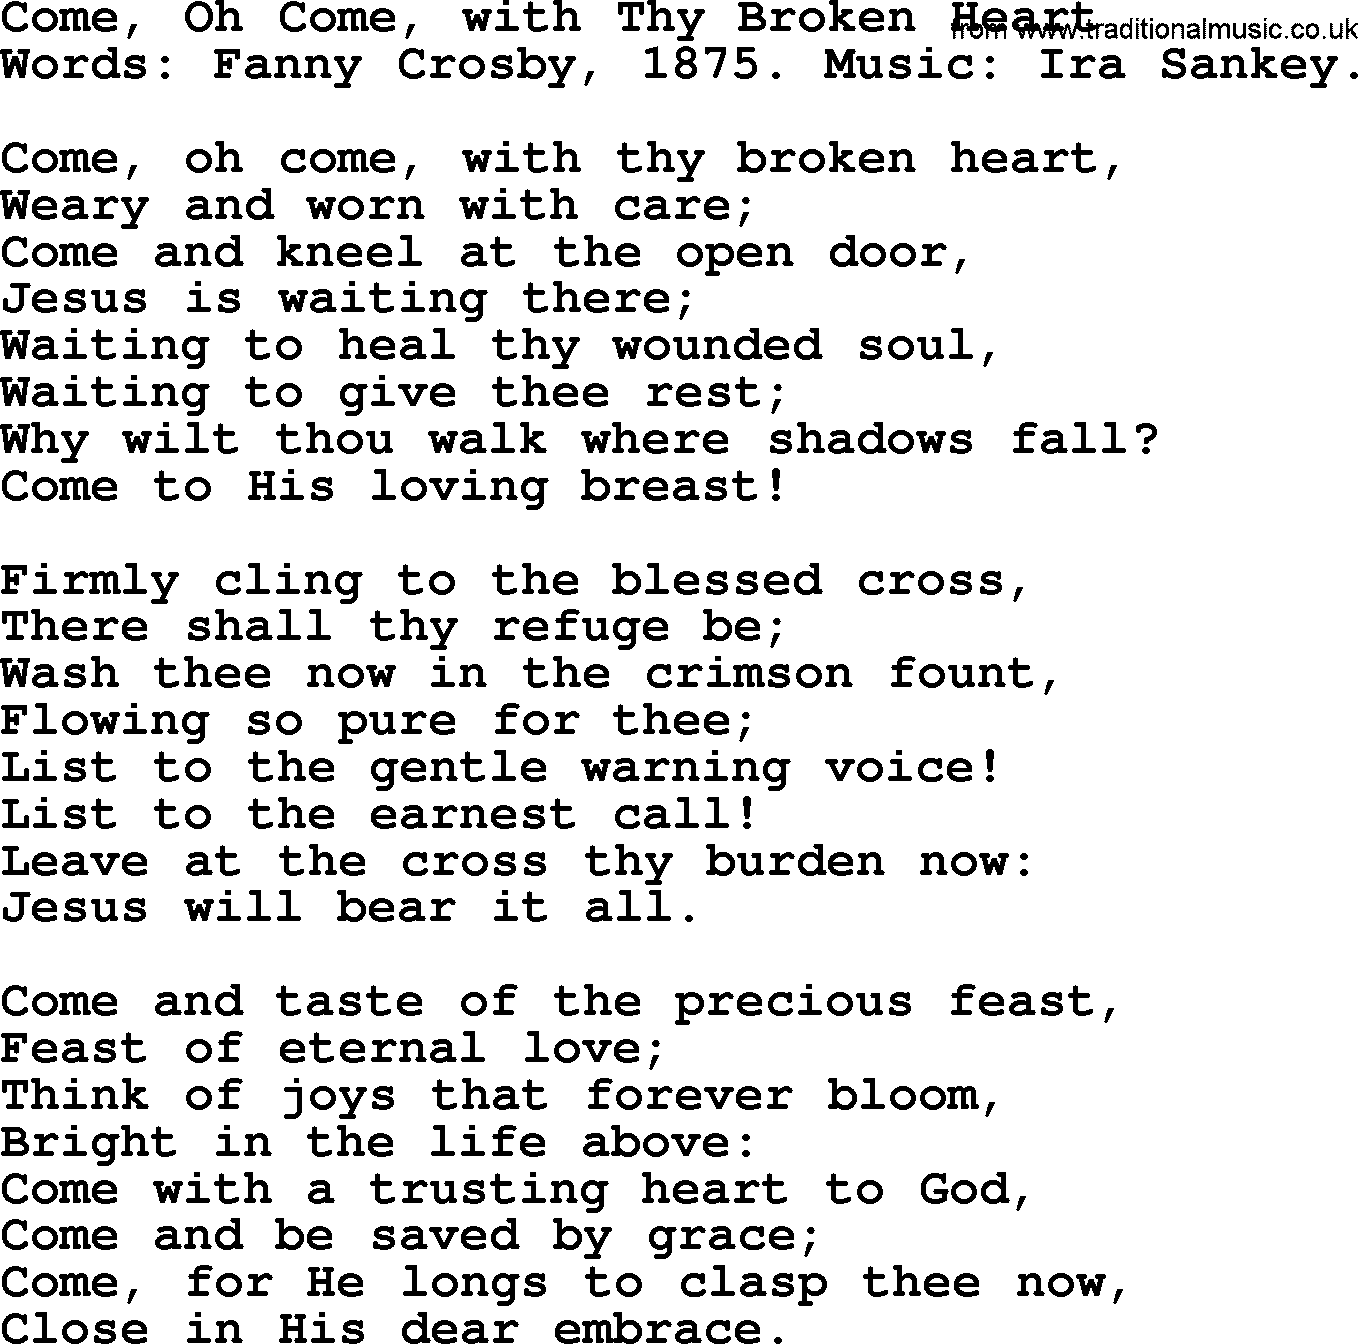 Fanny Crosby song: Come, Oh Come, With Thy Broken Heart, lyrics